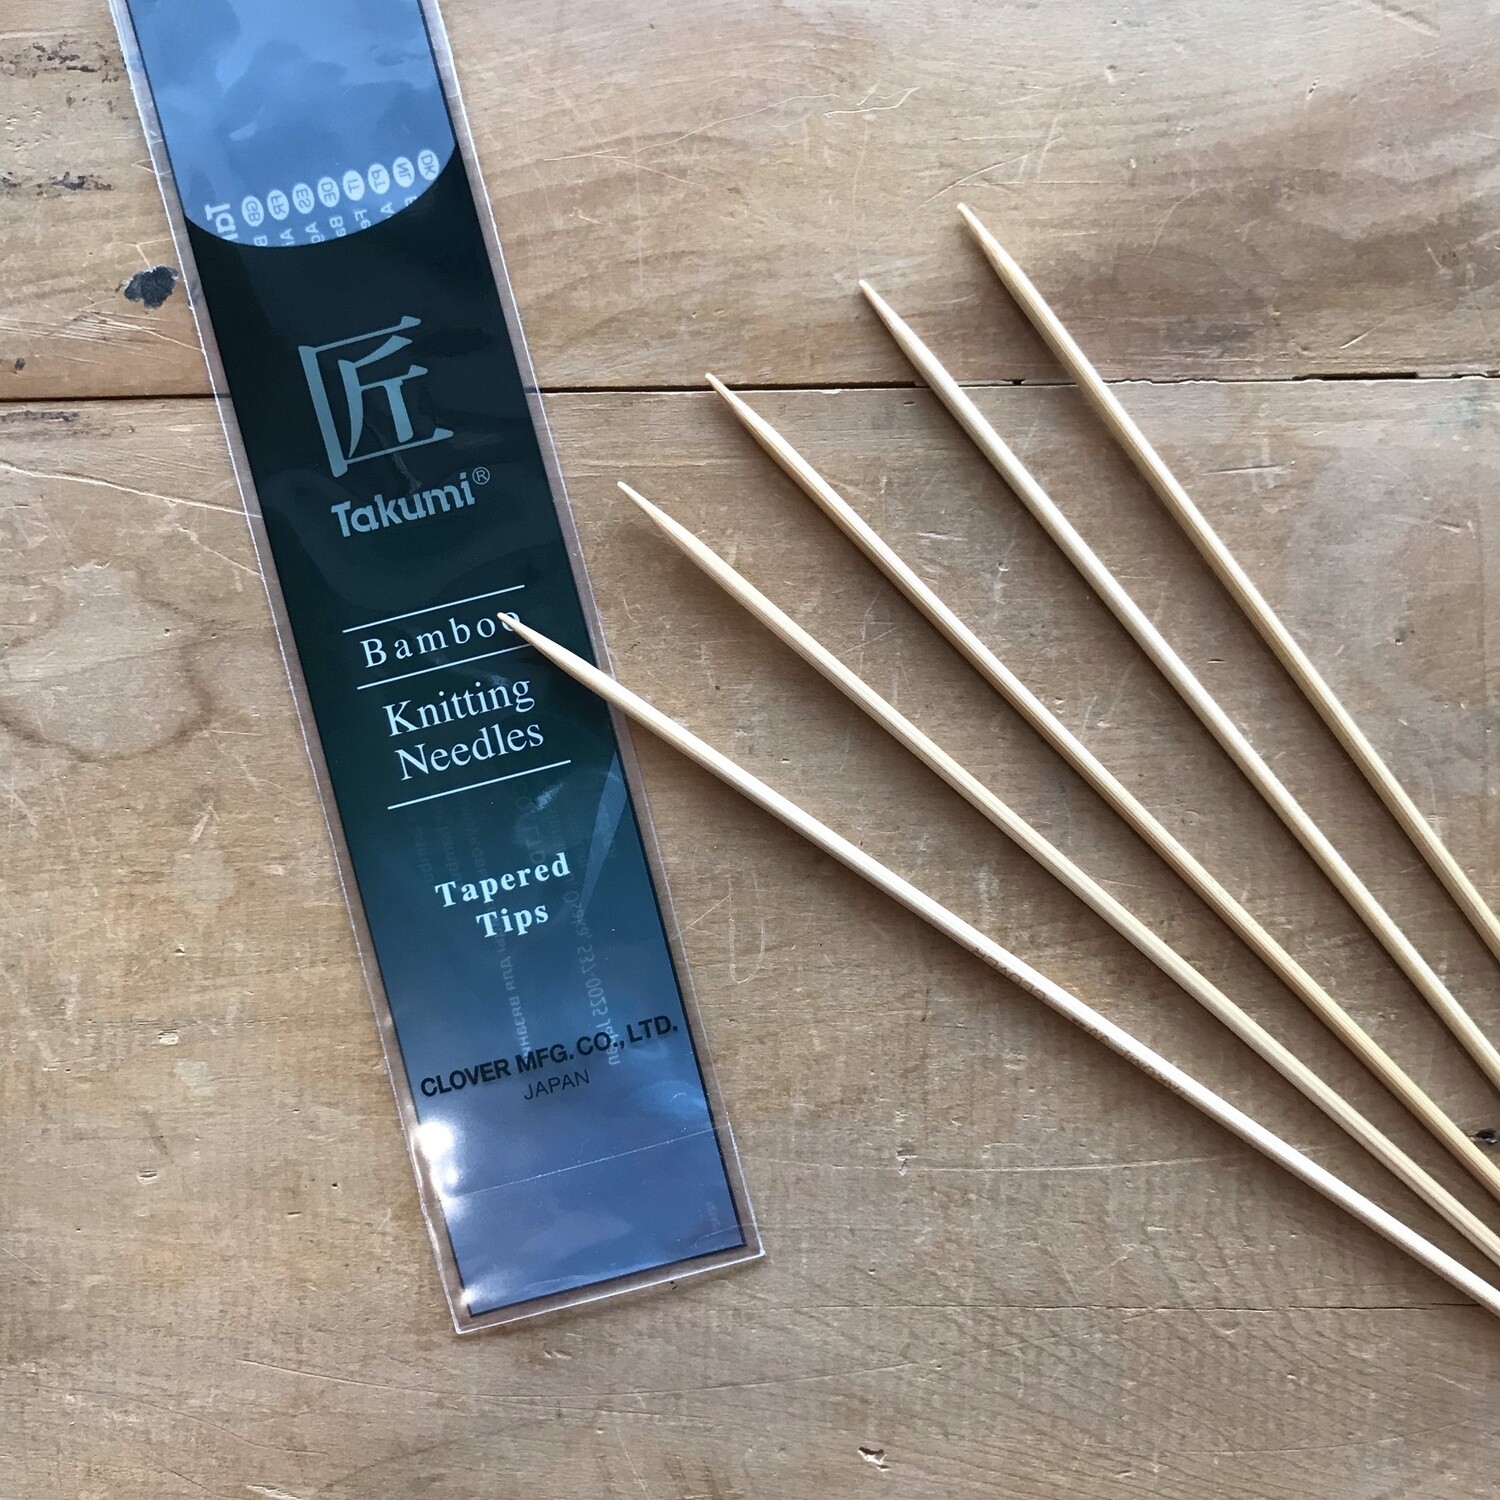 Clover 16cm Takumi Tapered Tips Bamboo Double Pointed Needles